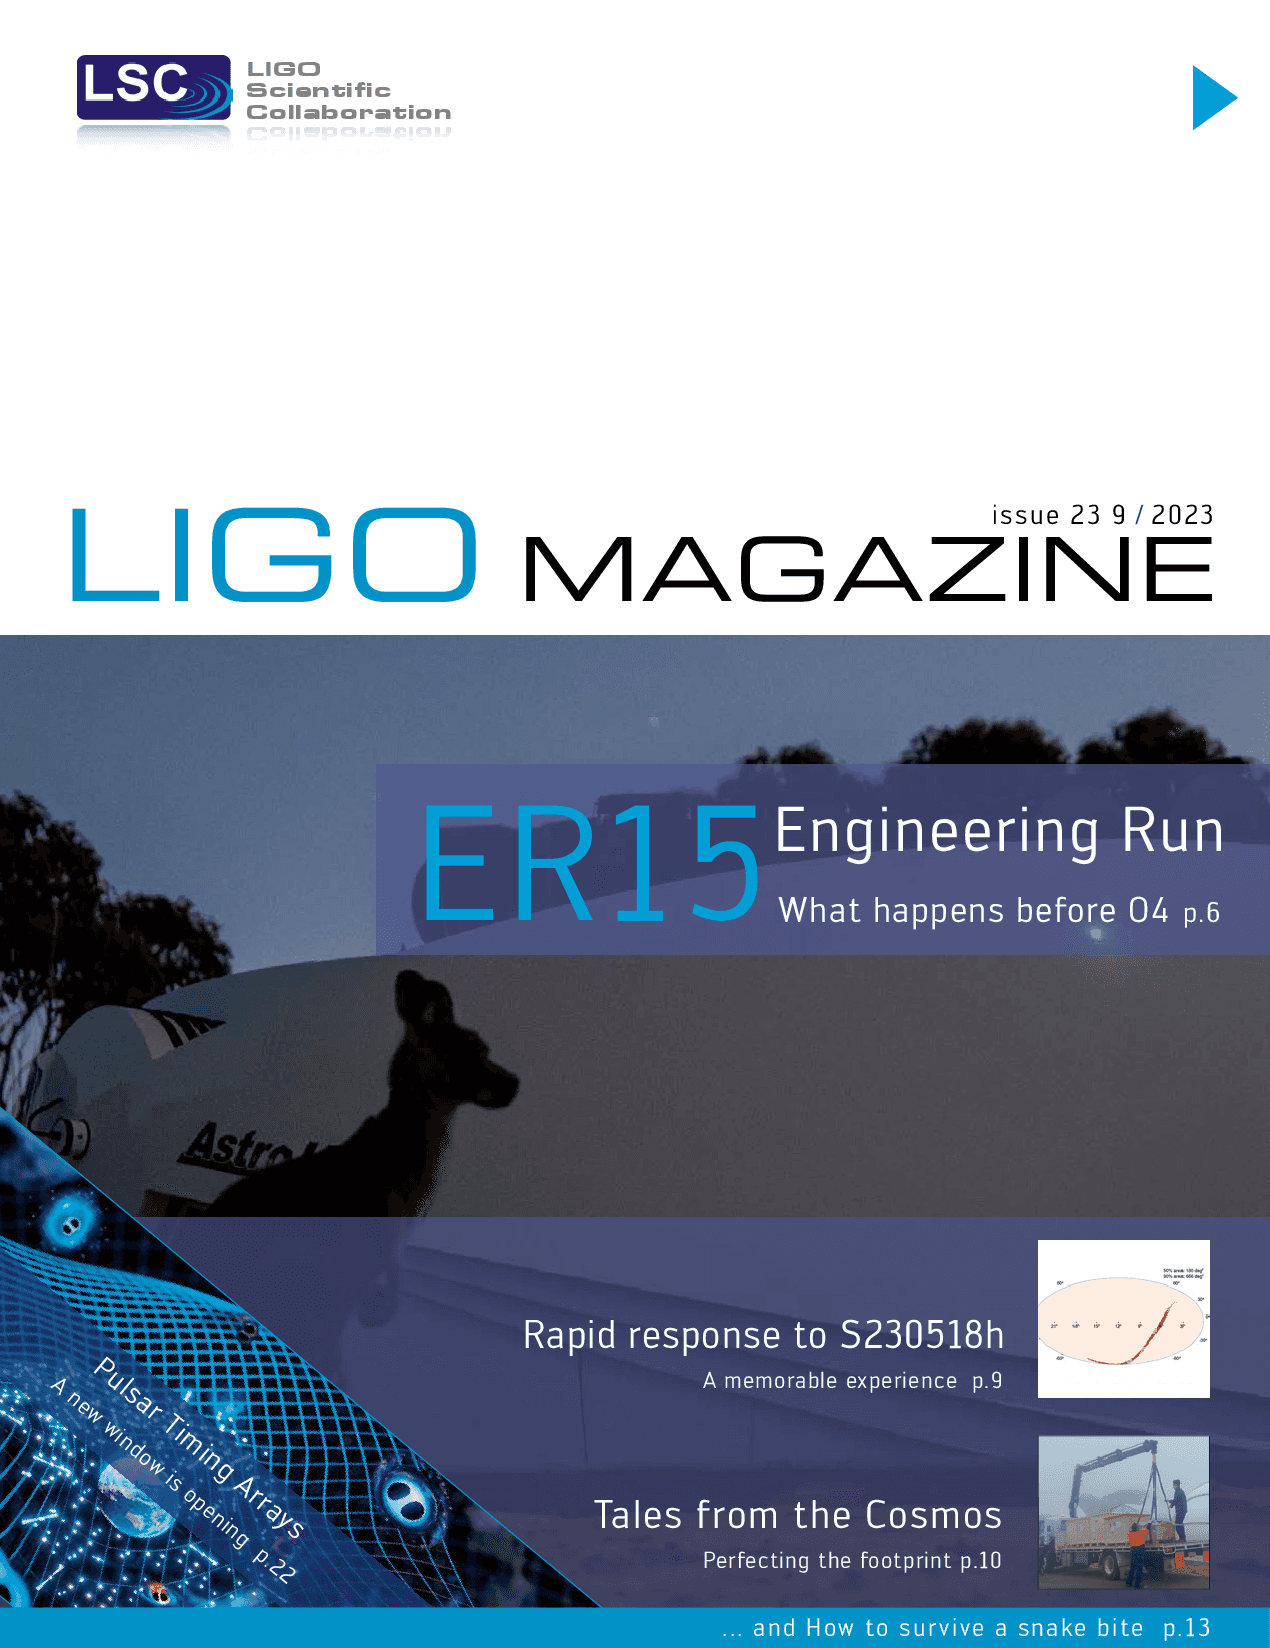 News-Image 16 of: New LIGO Magazine Issue 23 is out